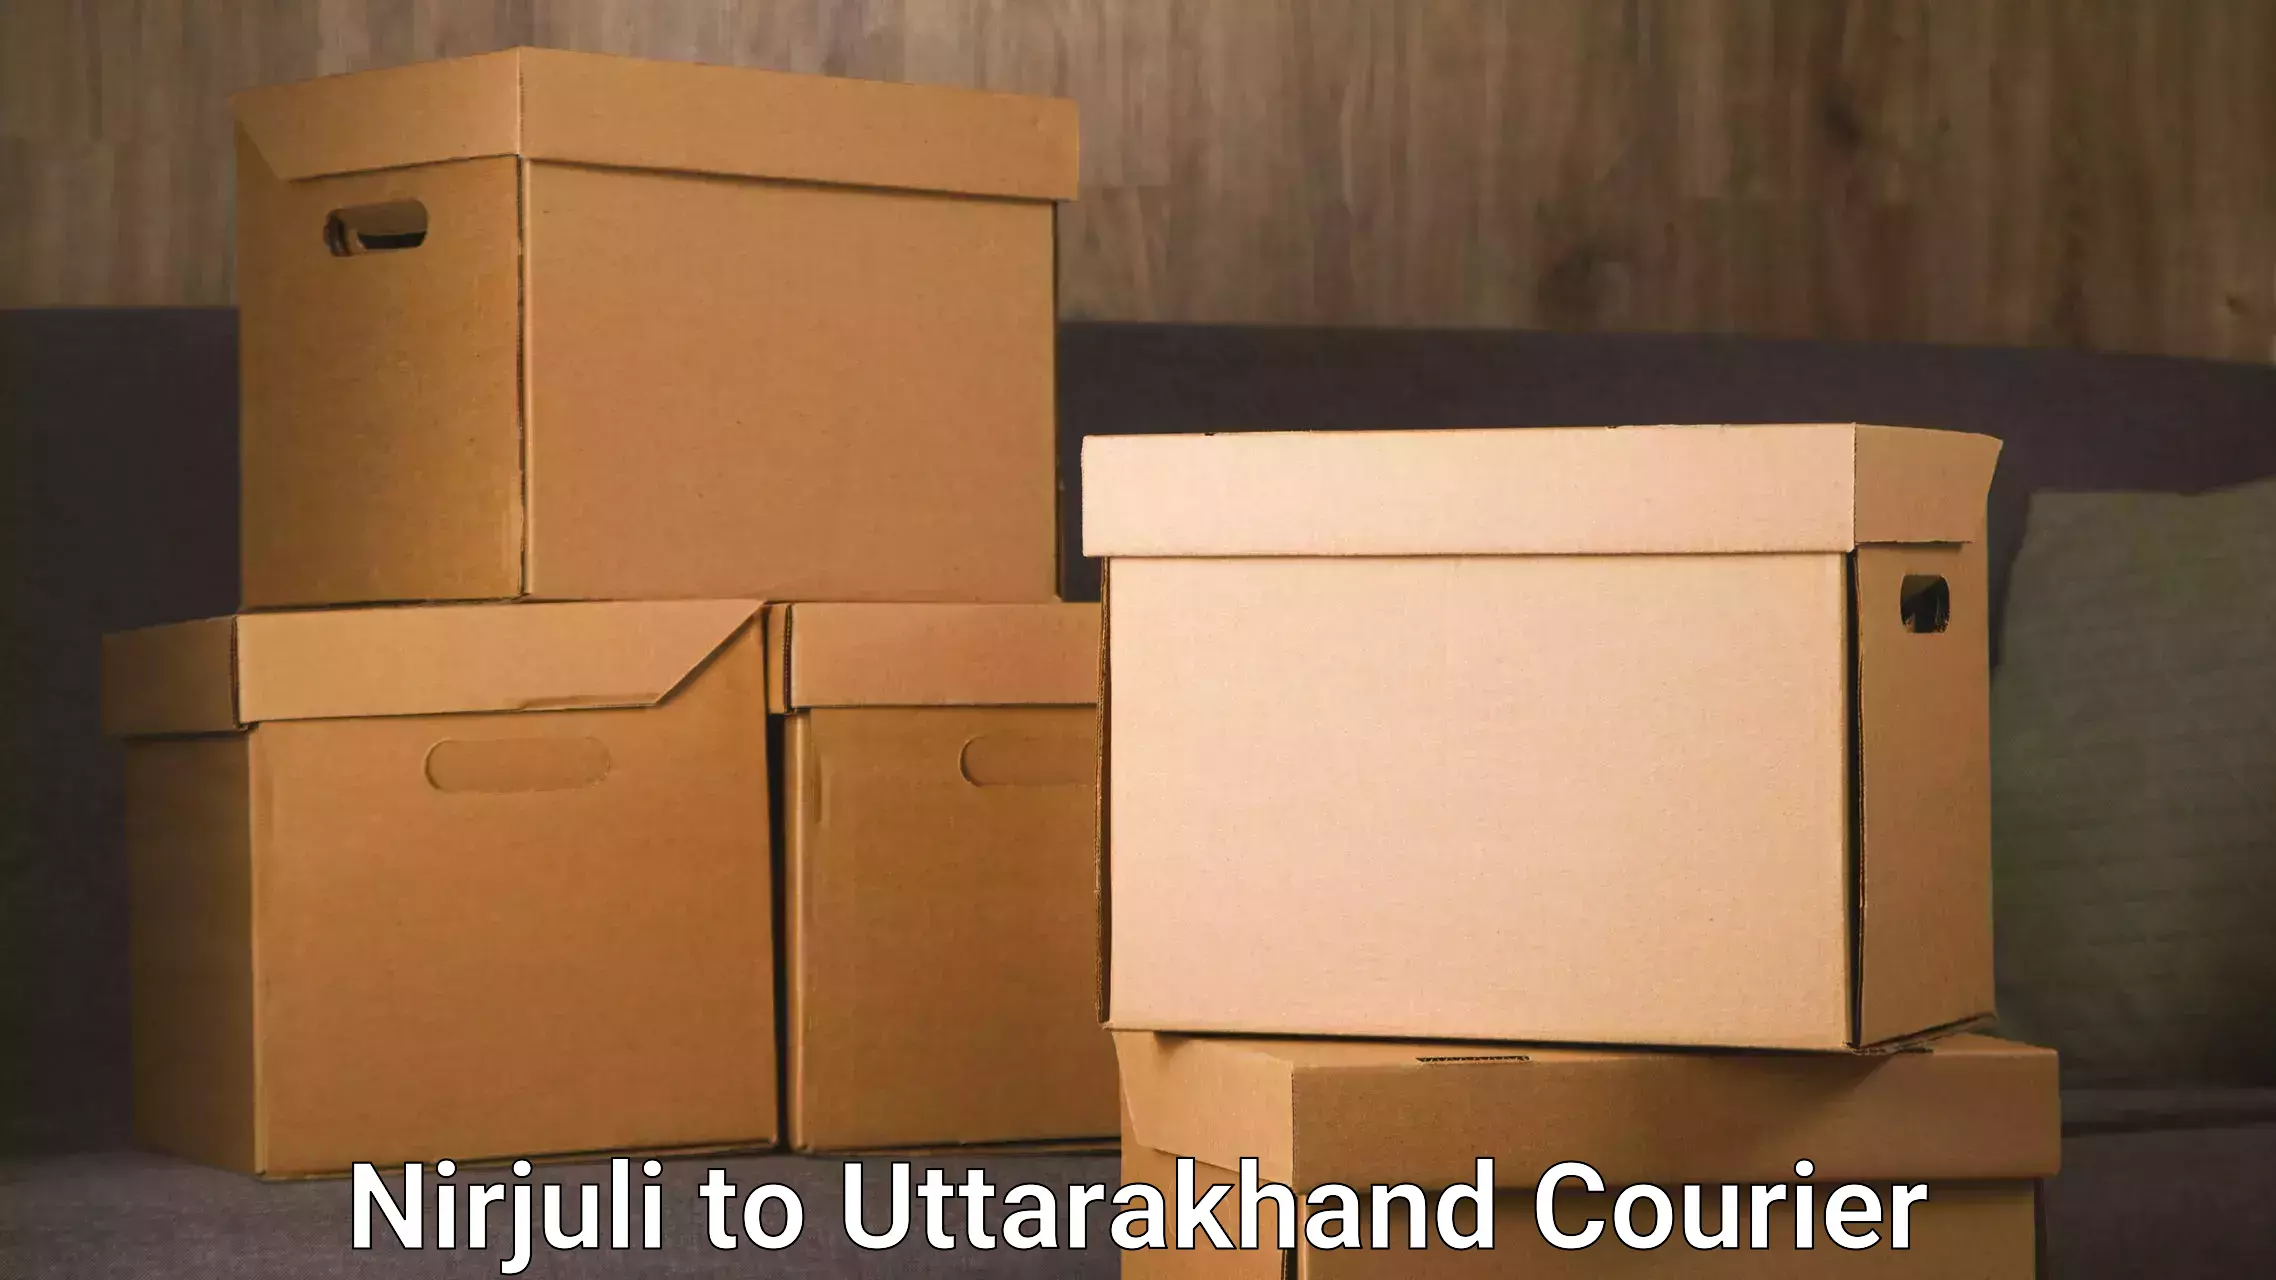 End-to-end delivery Nirjuli to Uttarakhand